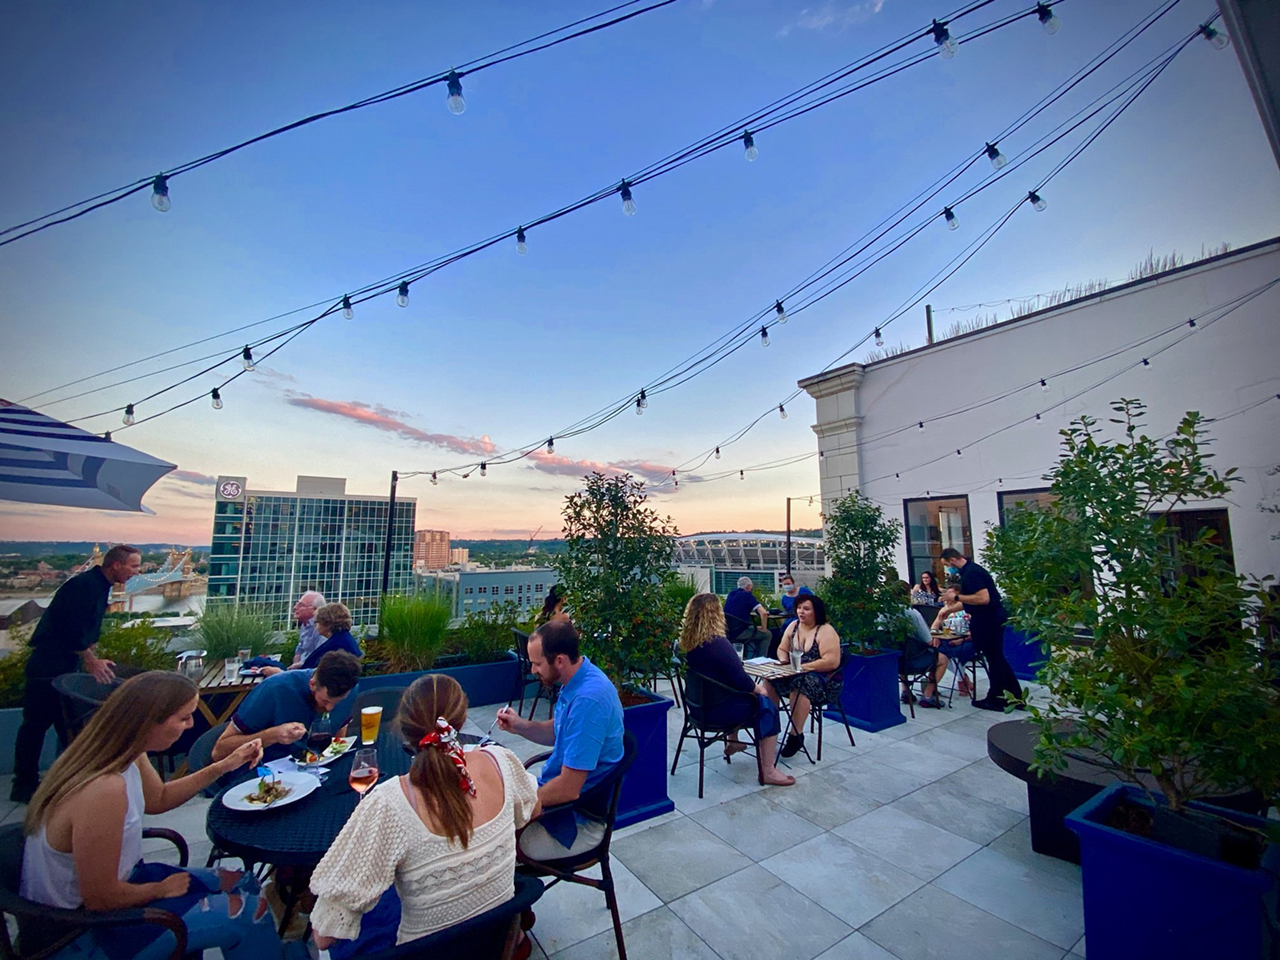 No. 9 Best Rooftop Bar: The View at Shires’ Garden
309 Vine St., 10th floor, Downtown